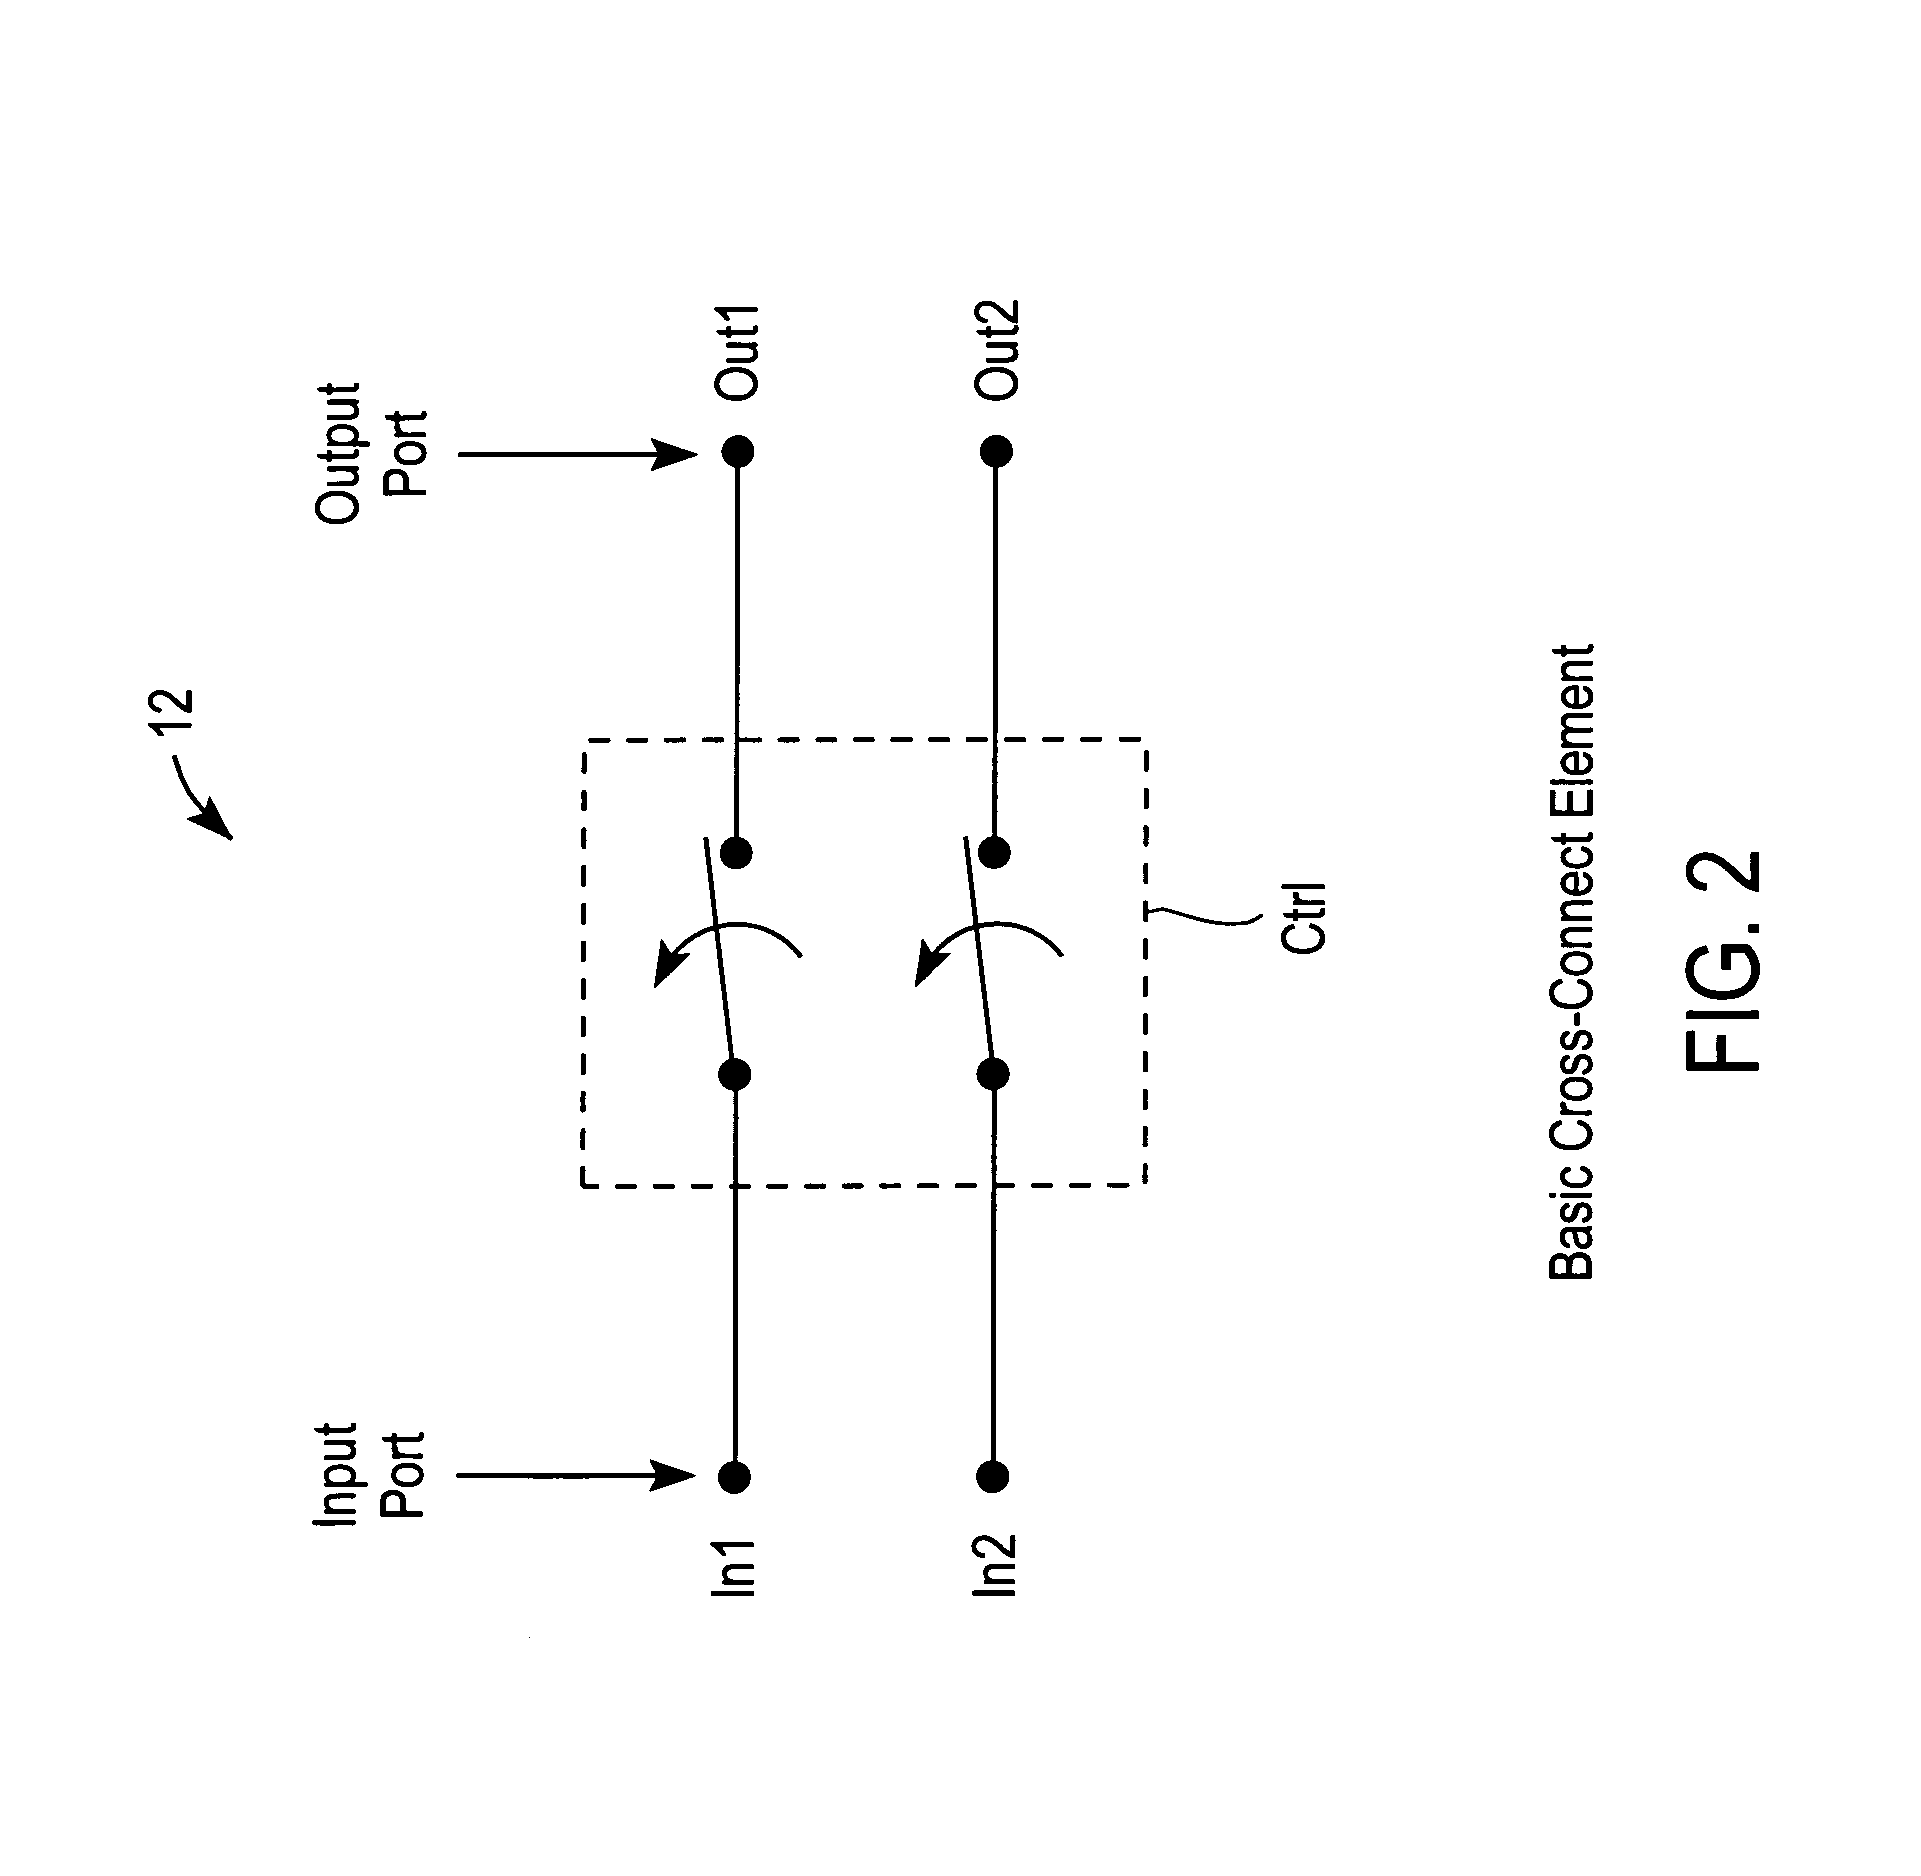 Physical architecture for design of high density metallic cross connect systems